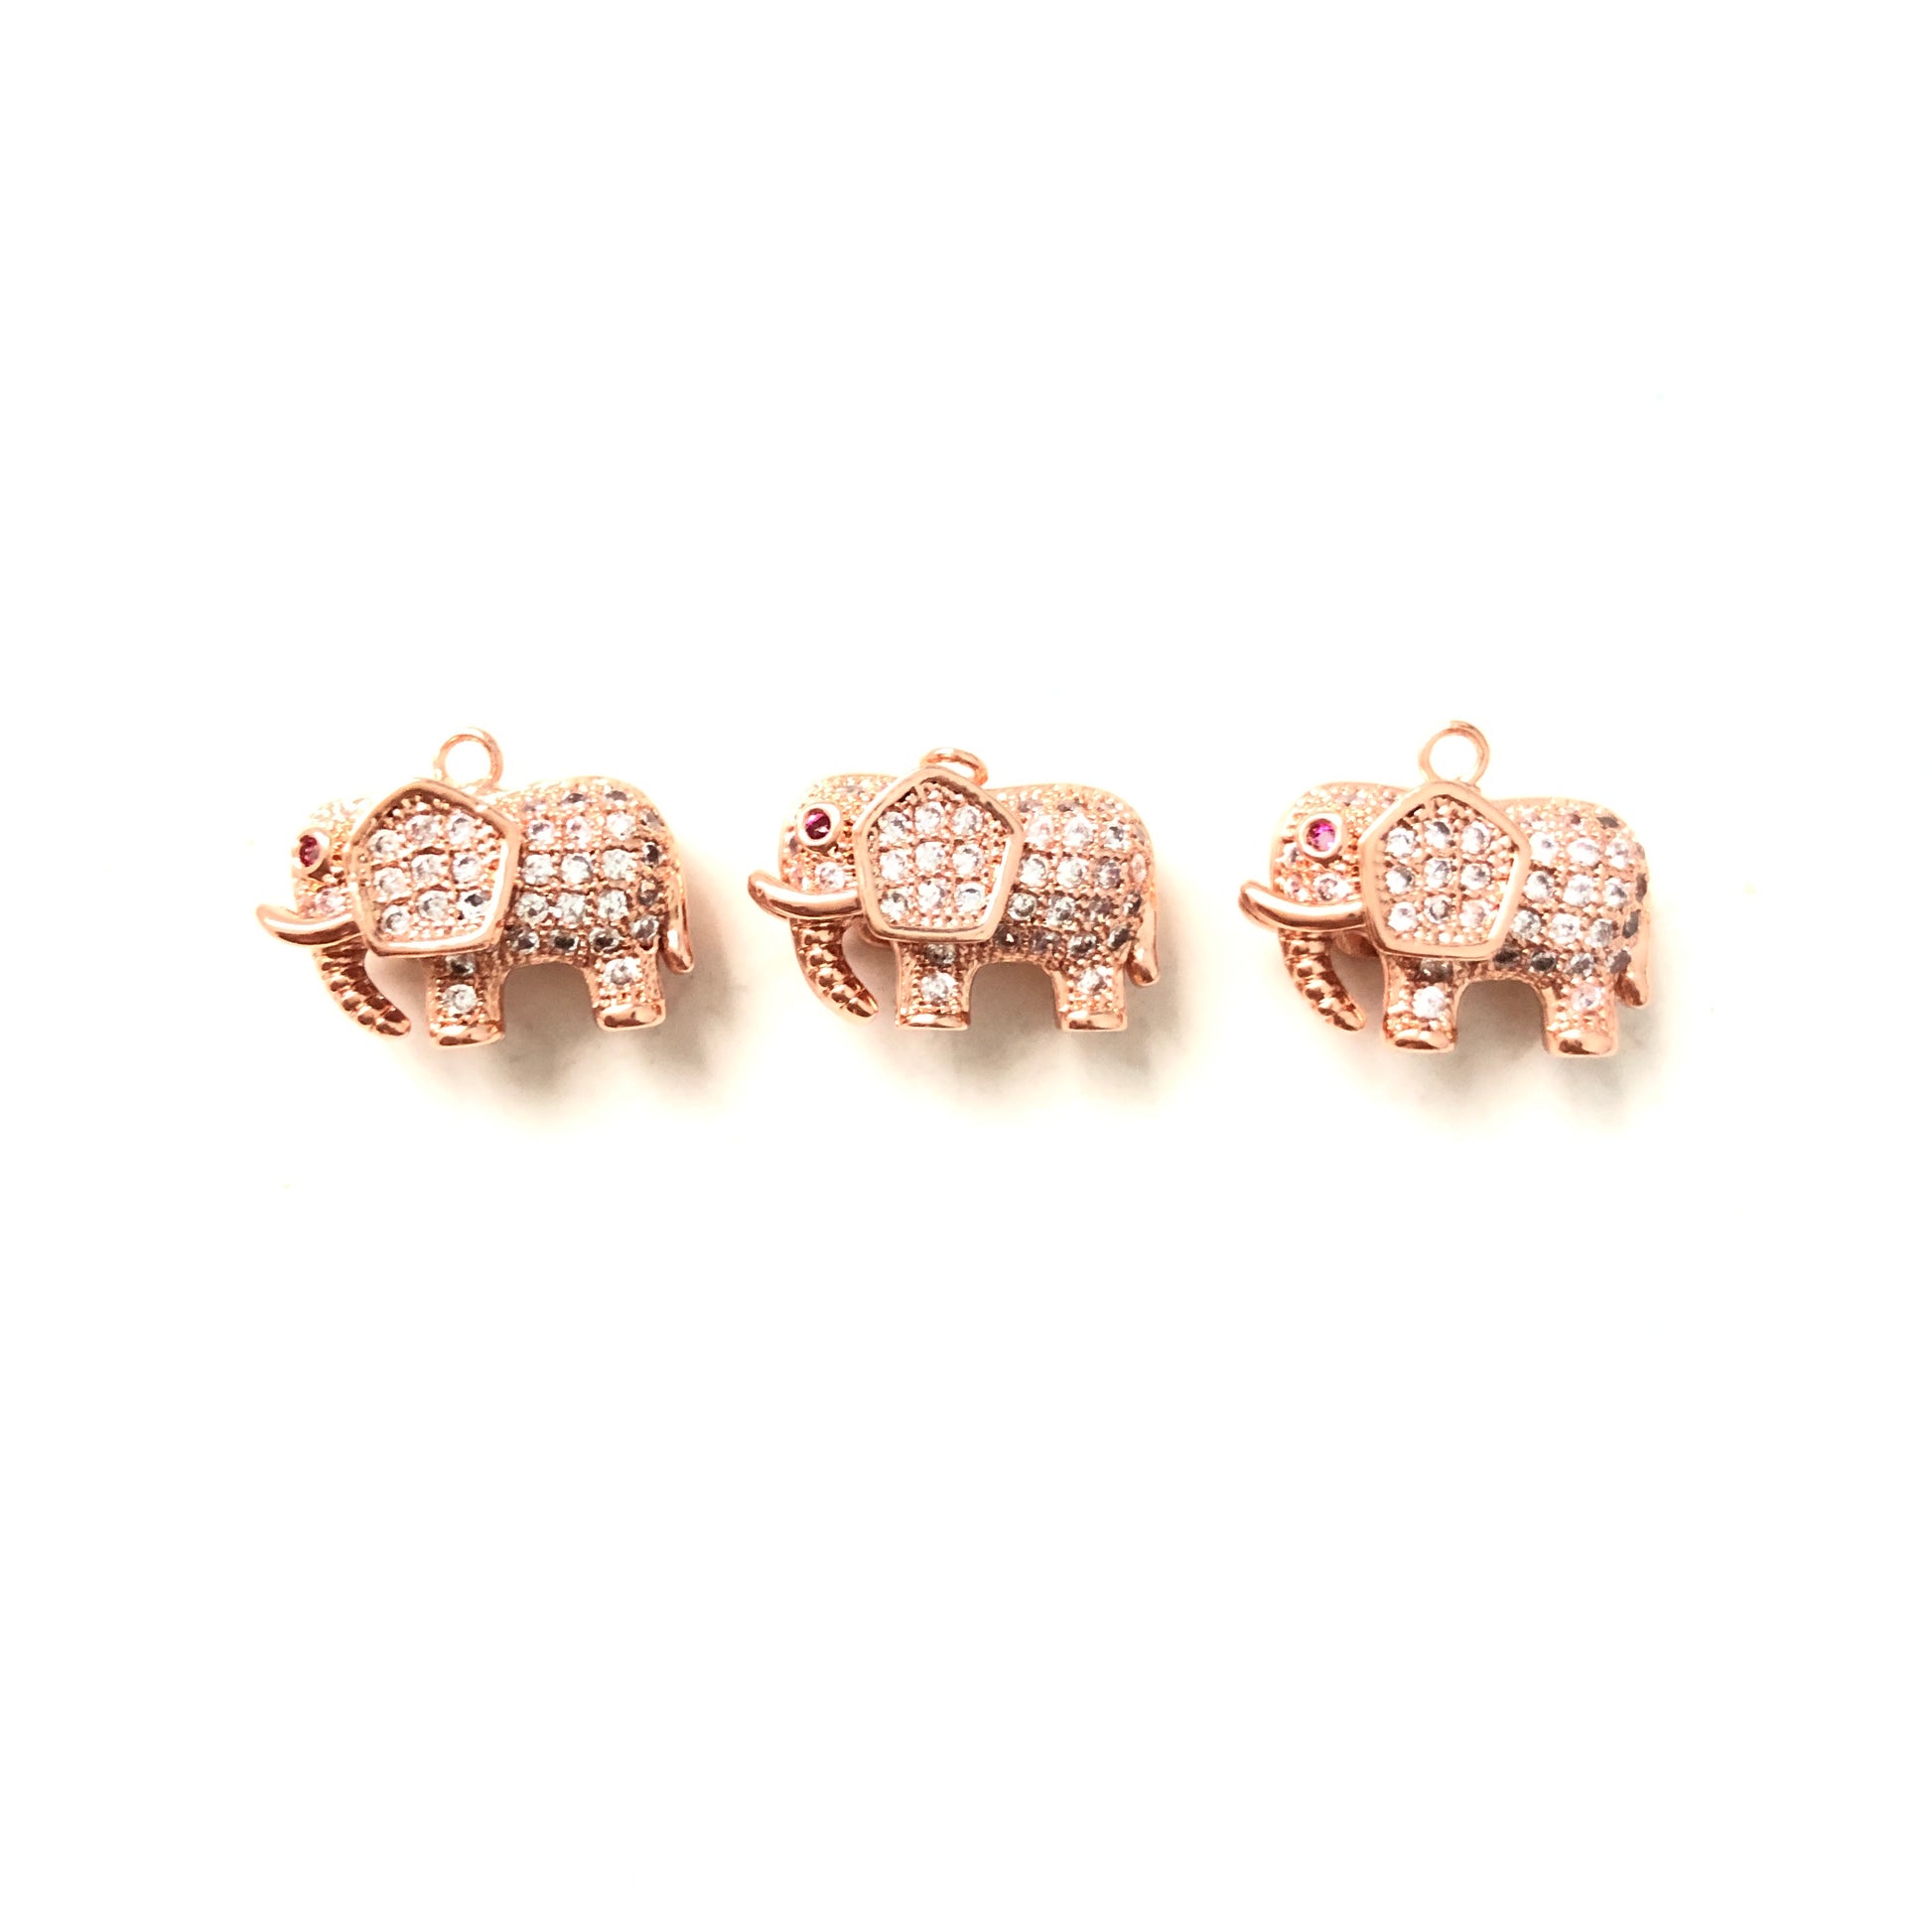 10pcs/lot 15*9mm CZ Paved Elephant Charms Rose Gold CZ Paved Charms Animals & Insects Small Sizes Charms Beads Beyond